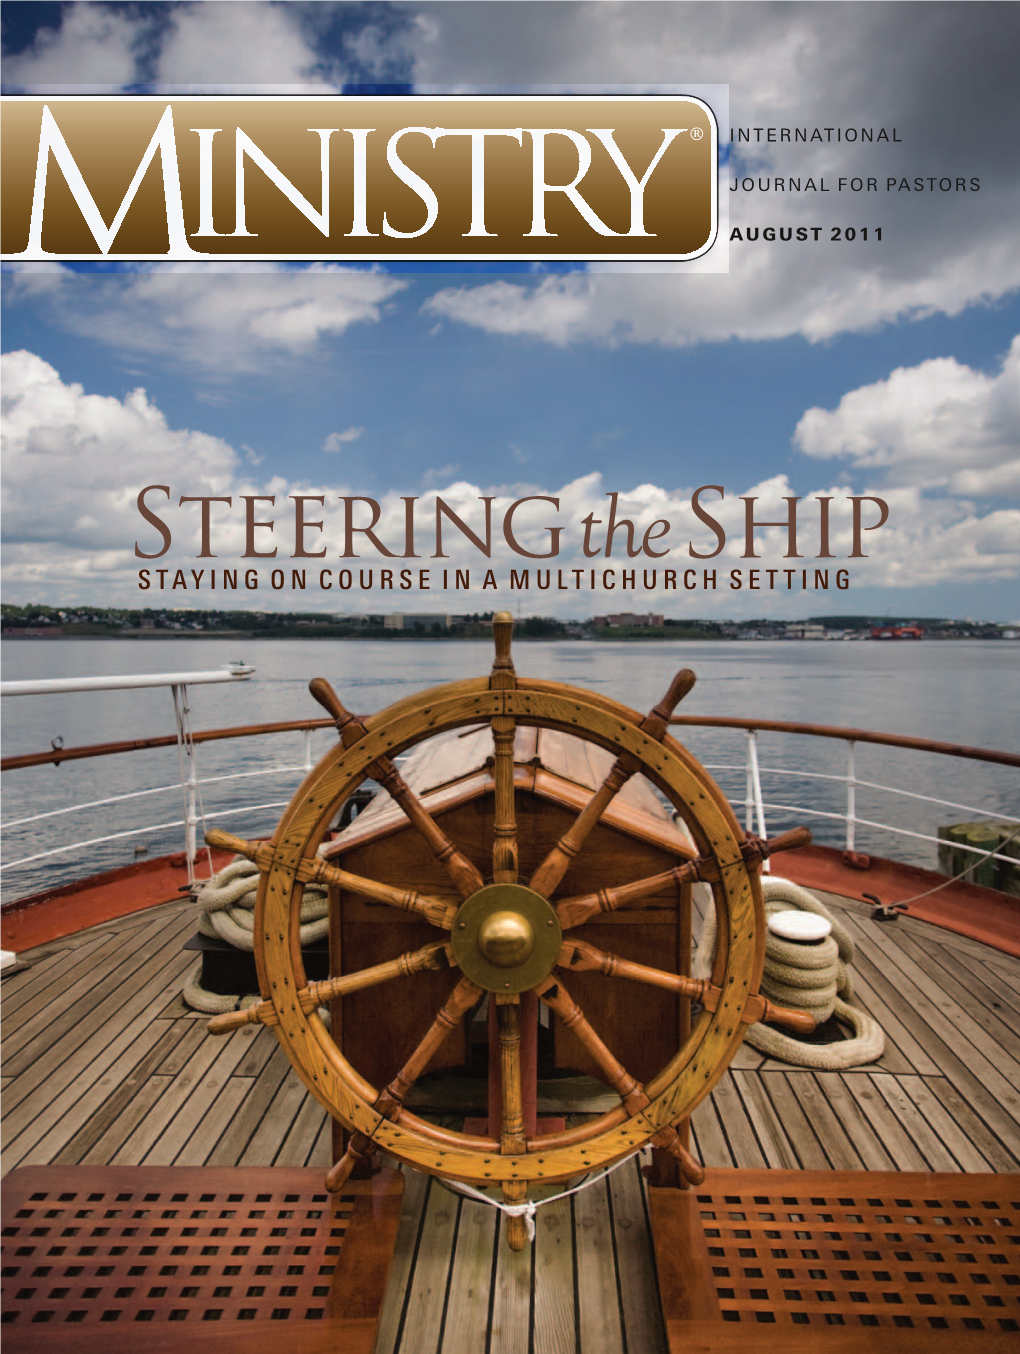 Steeringtheship Staying on Course in a Multichurch Setting Prophecies Decoded Can the Past Reveal Your Future? September 30-October 29, 2011 7:30 P.M